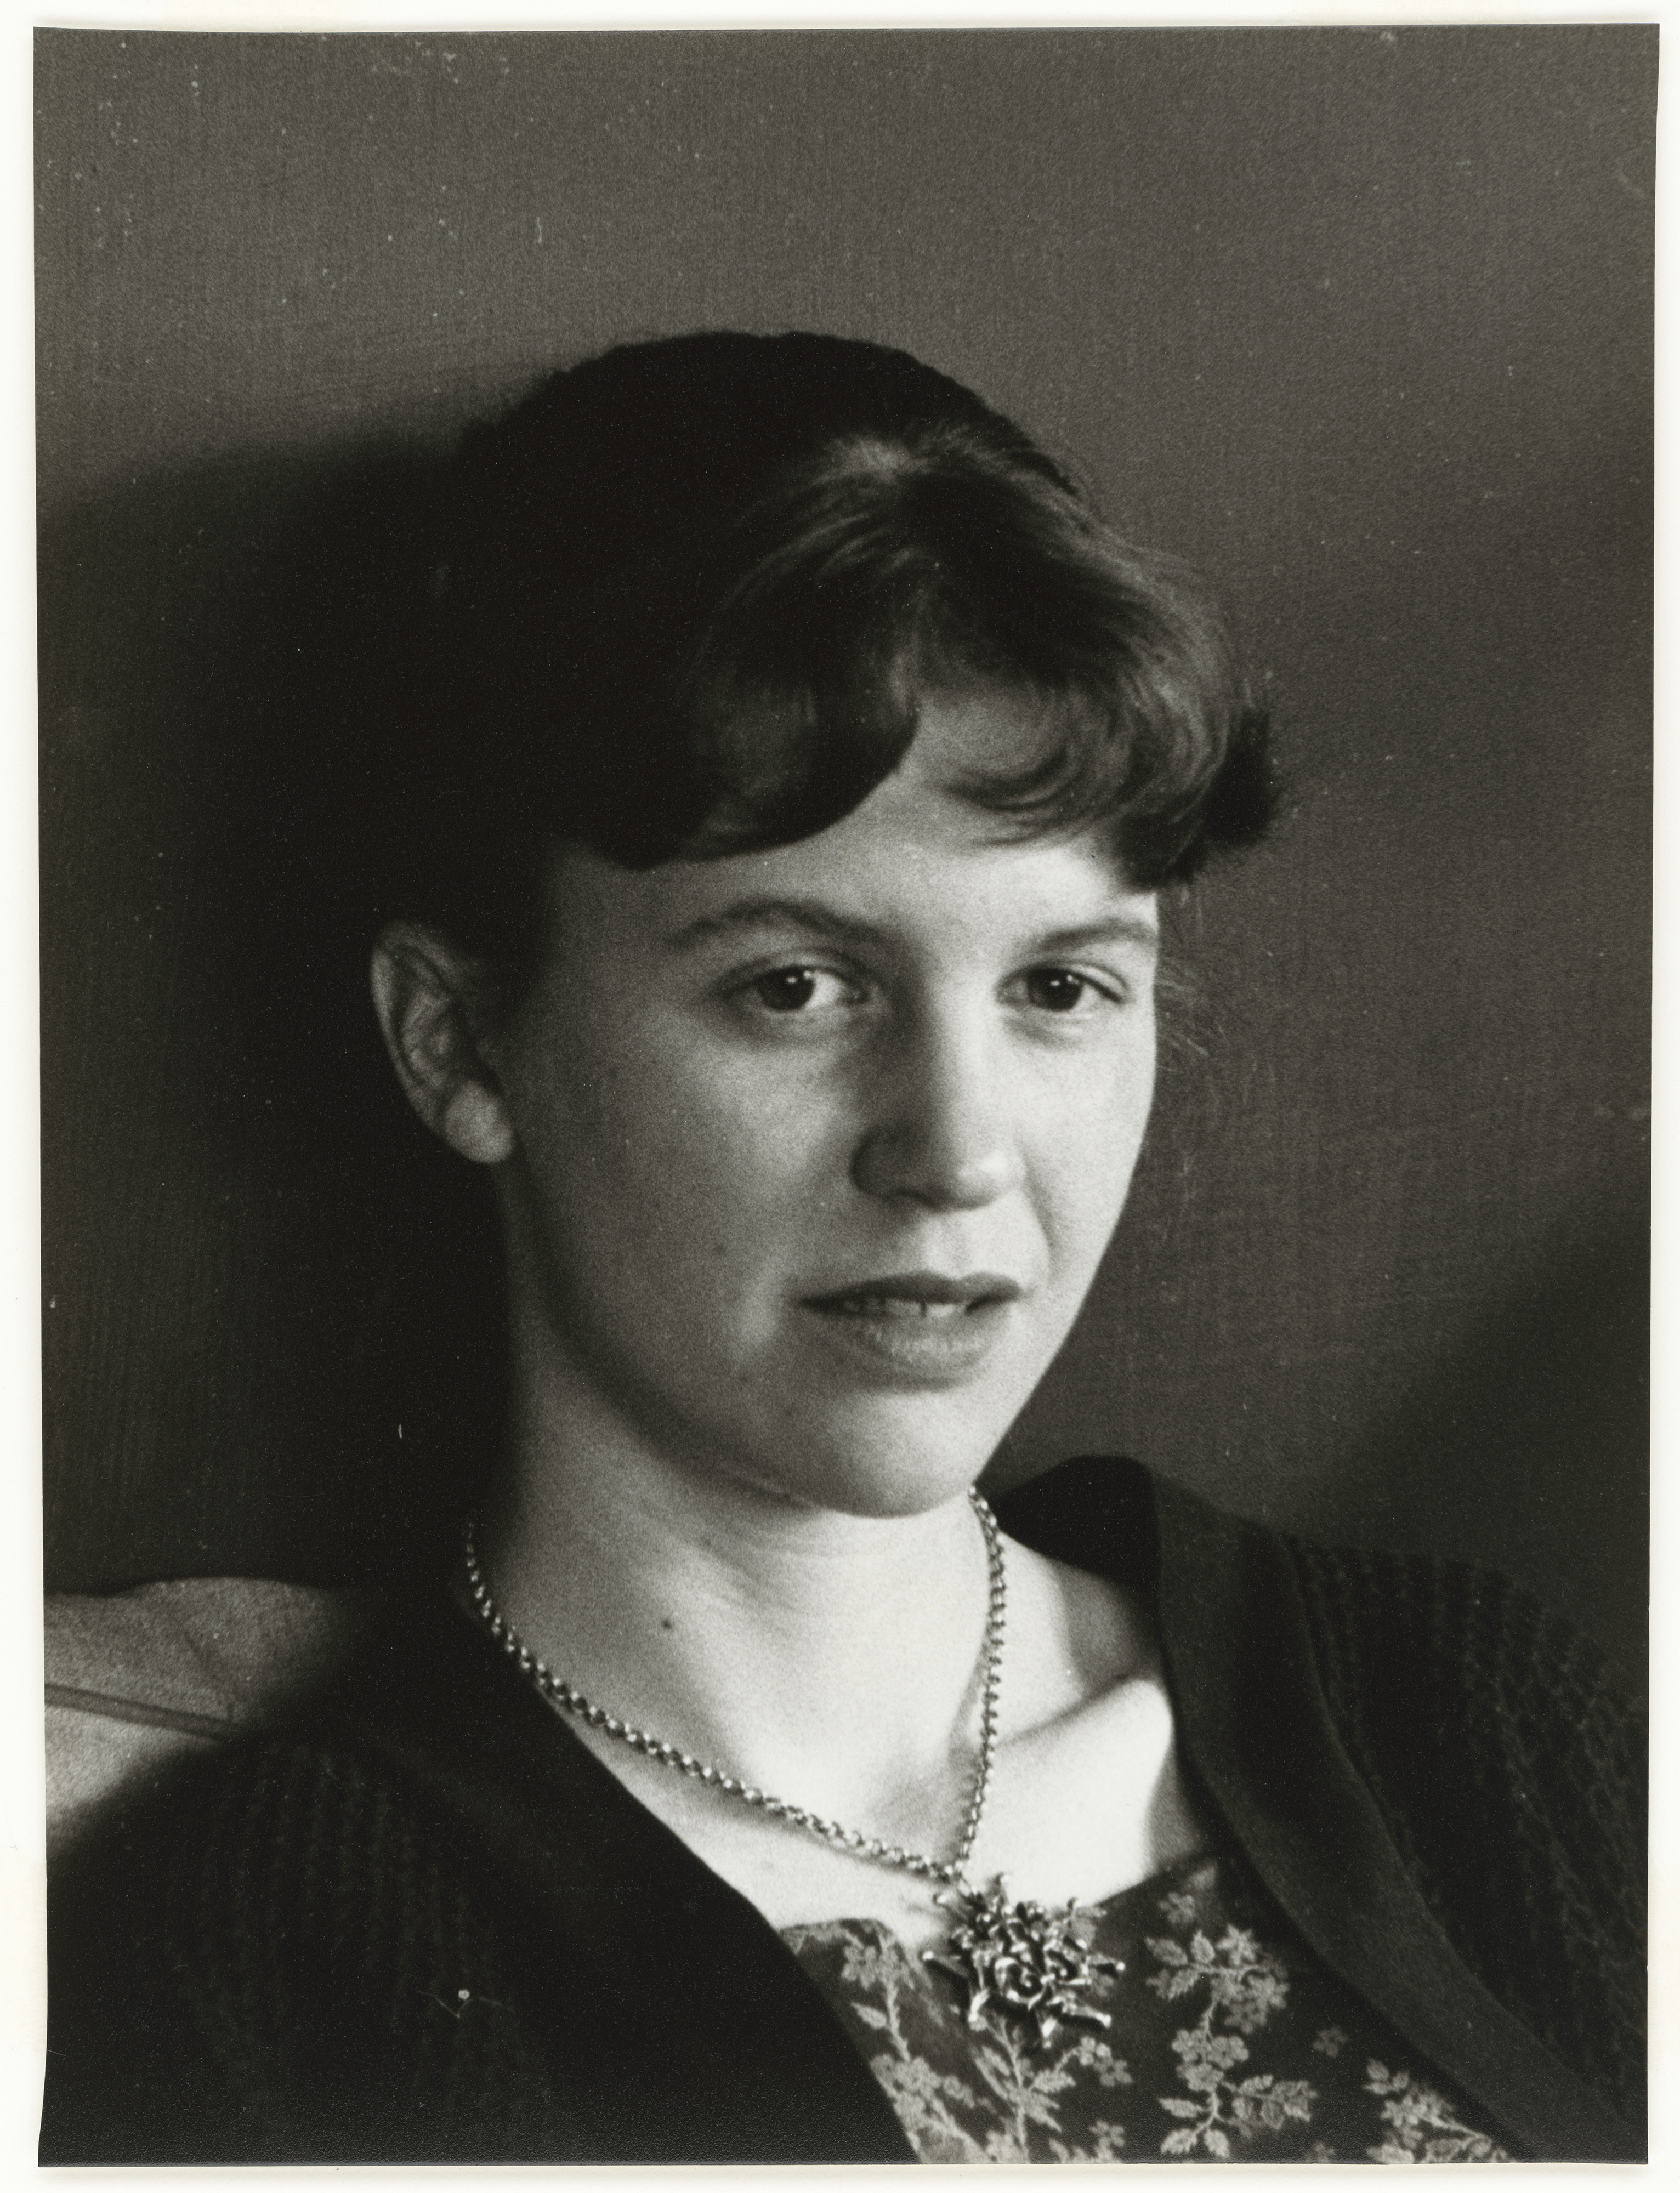 Portrait Gallery Opens Visual Exploration of the Life of Sylvia Plath